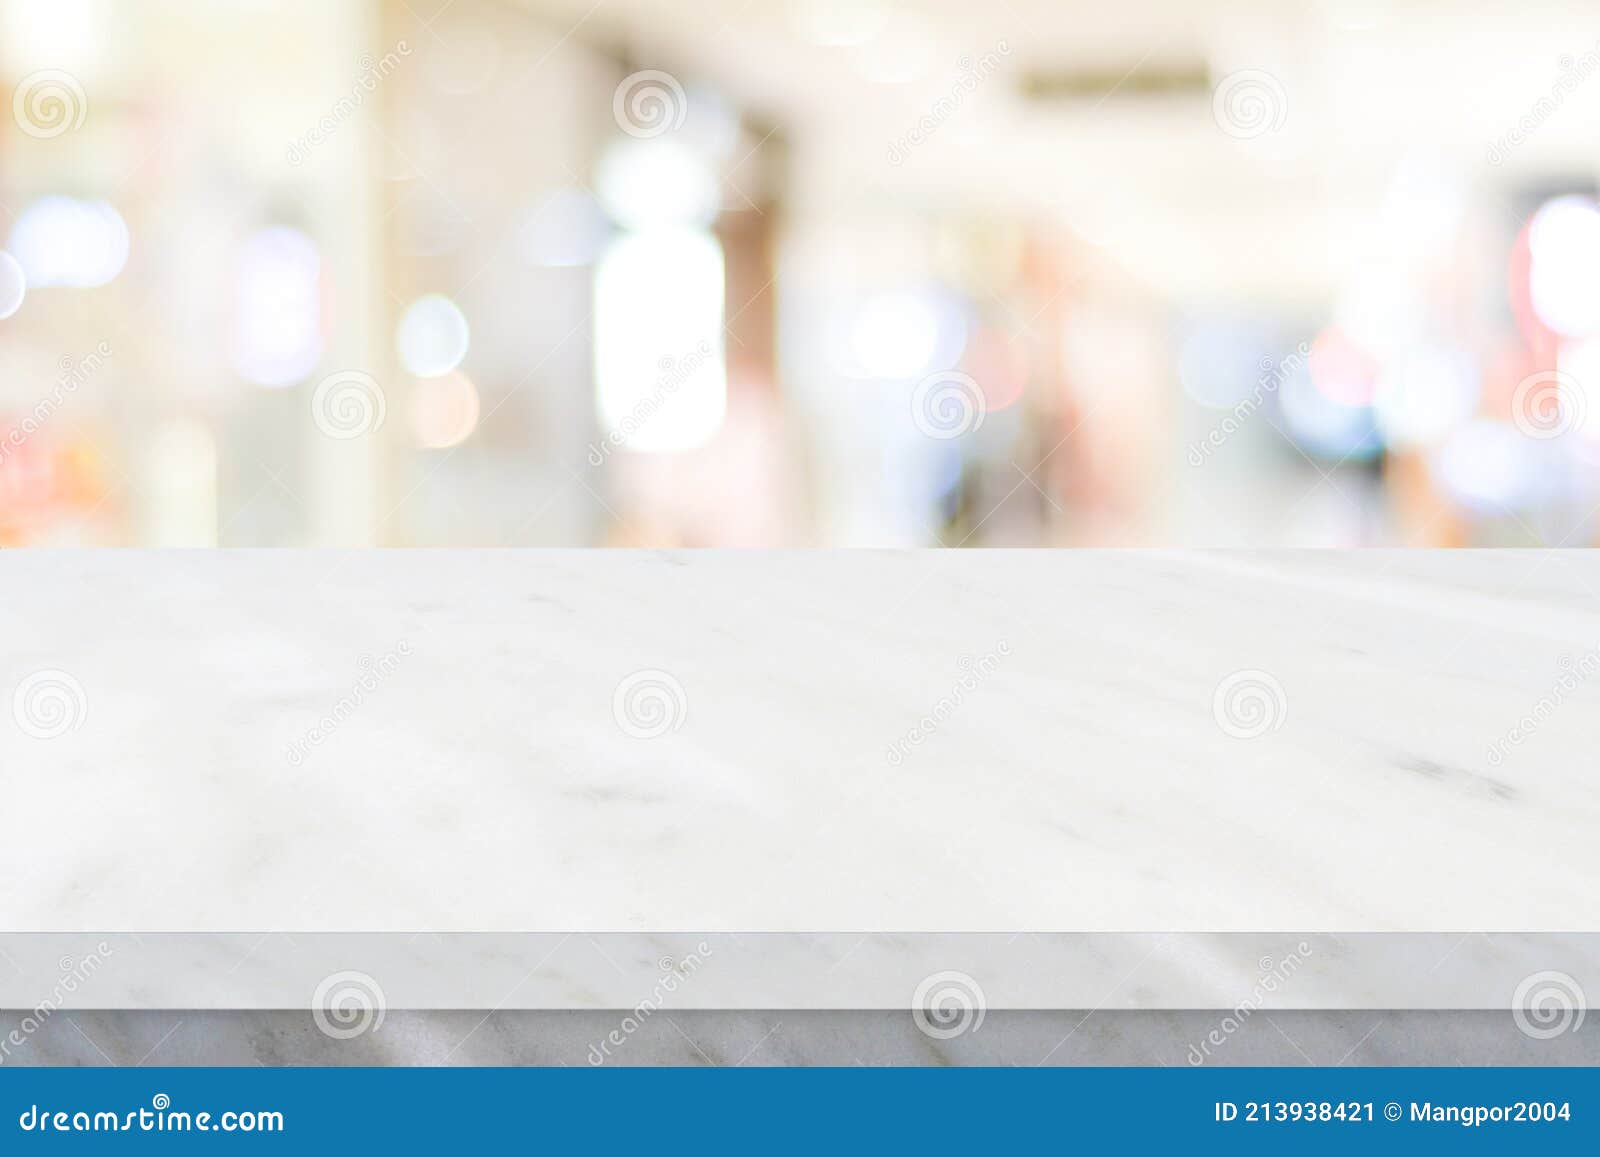 empty white table top, counter, desk over blur perspective store with bokeh light background, white marble stone table, shelf and